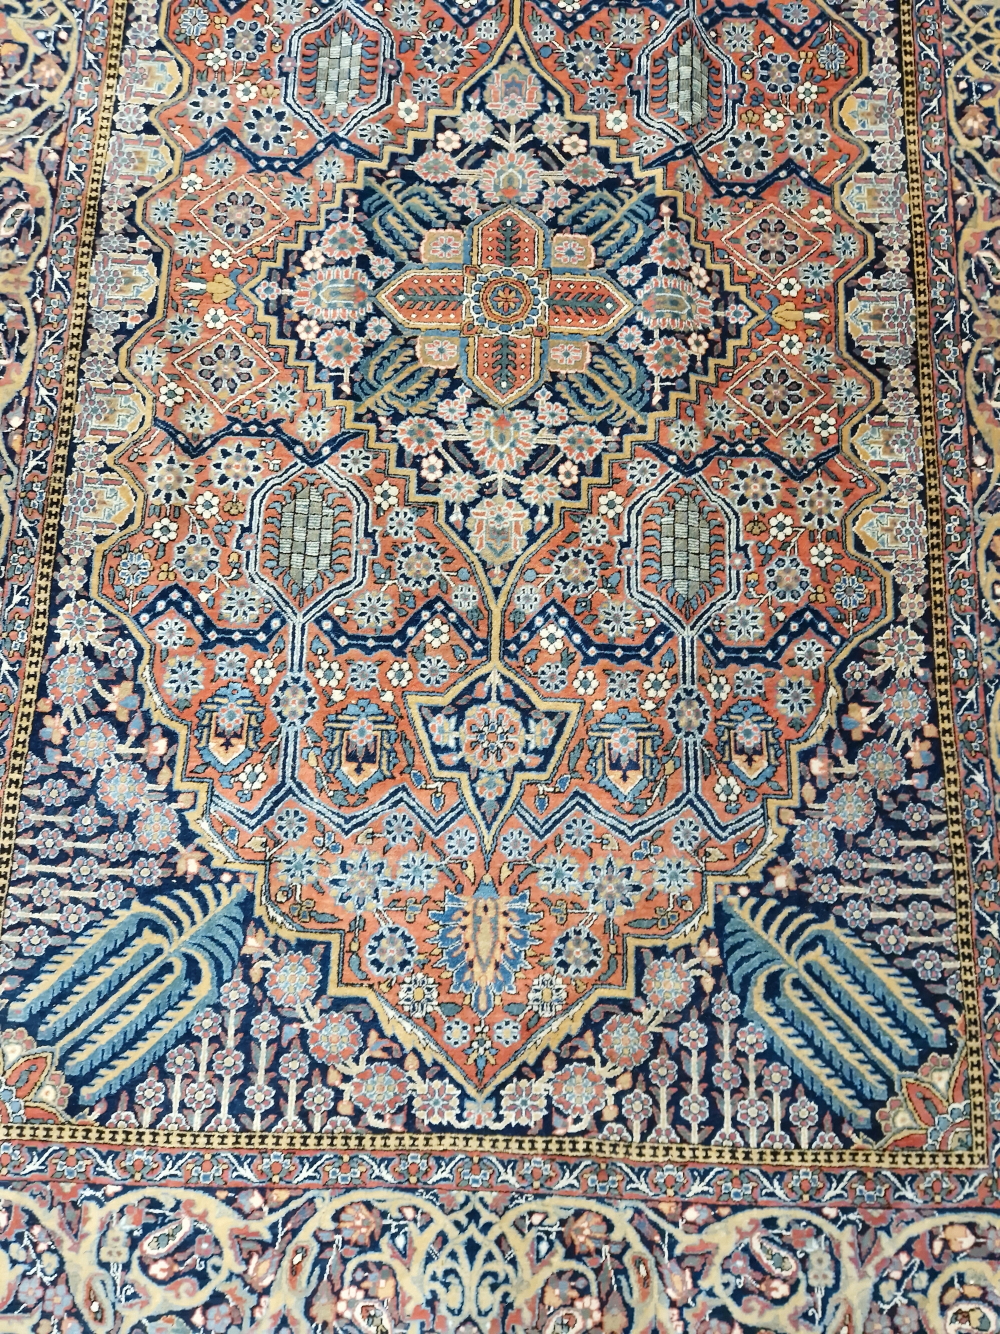 A PAIR OF ANTIQUE PERSIAN KASHAN RUGS. 298 x 132cms - Image 5 of 12